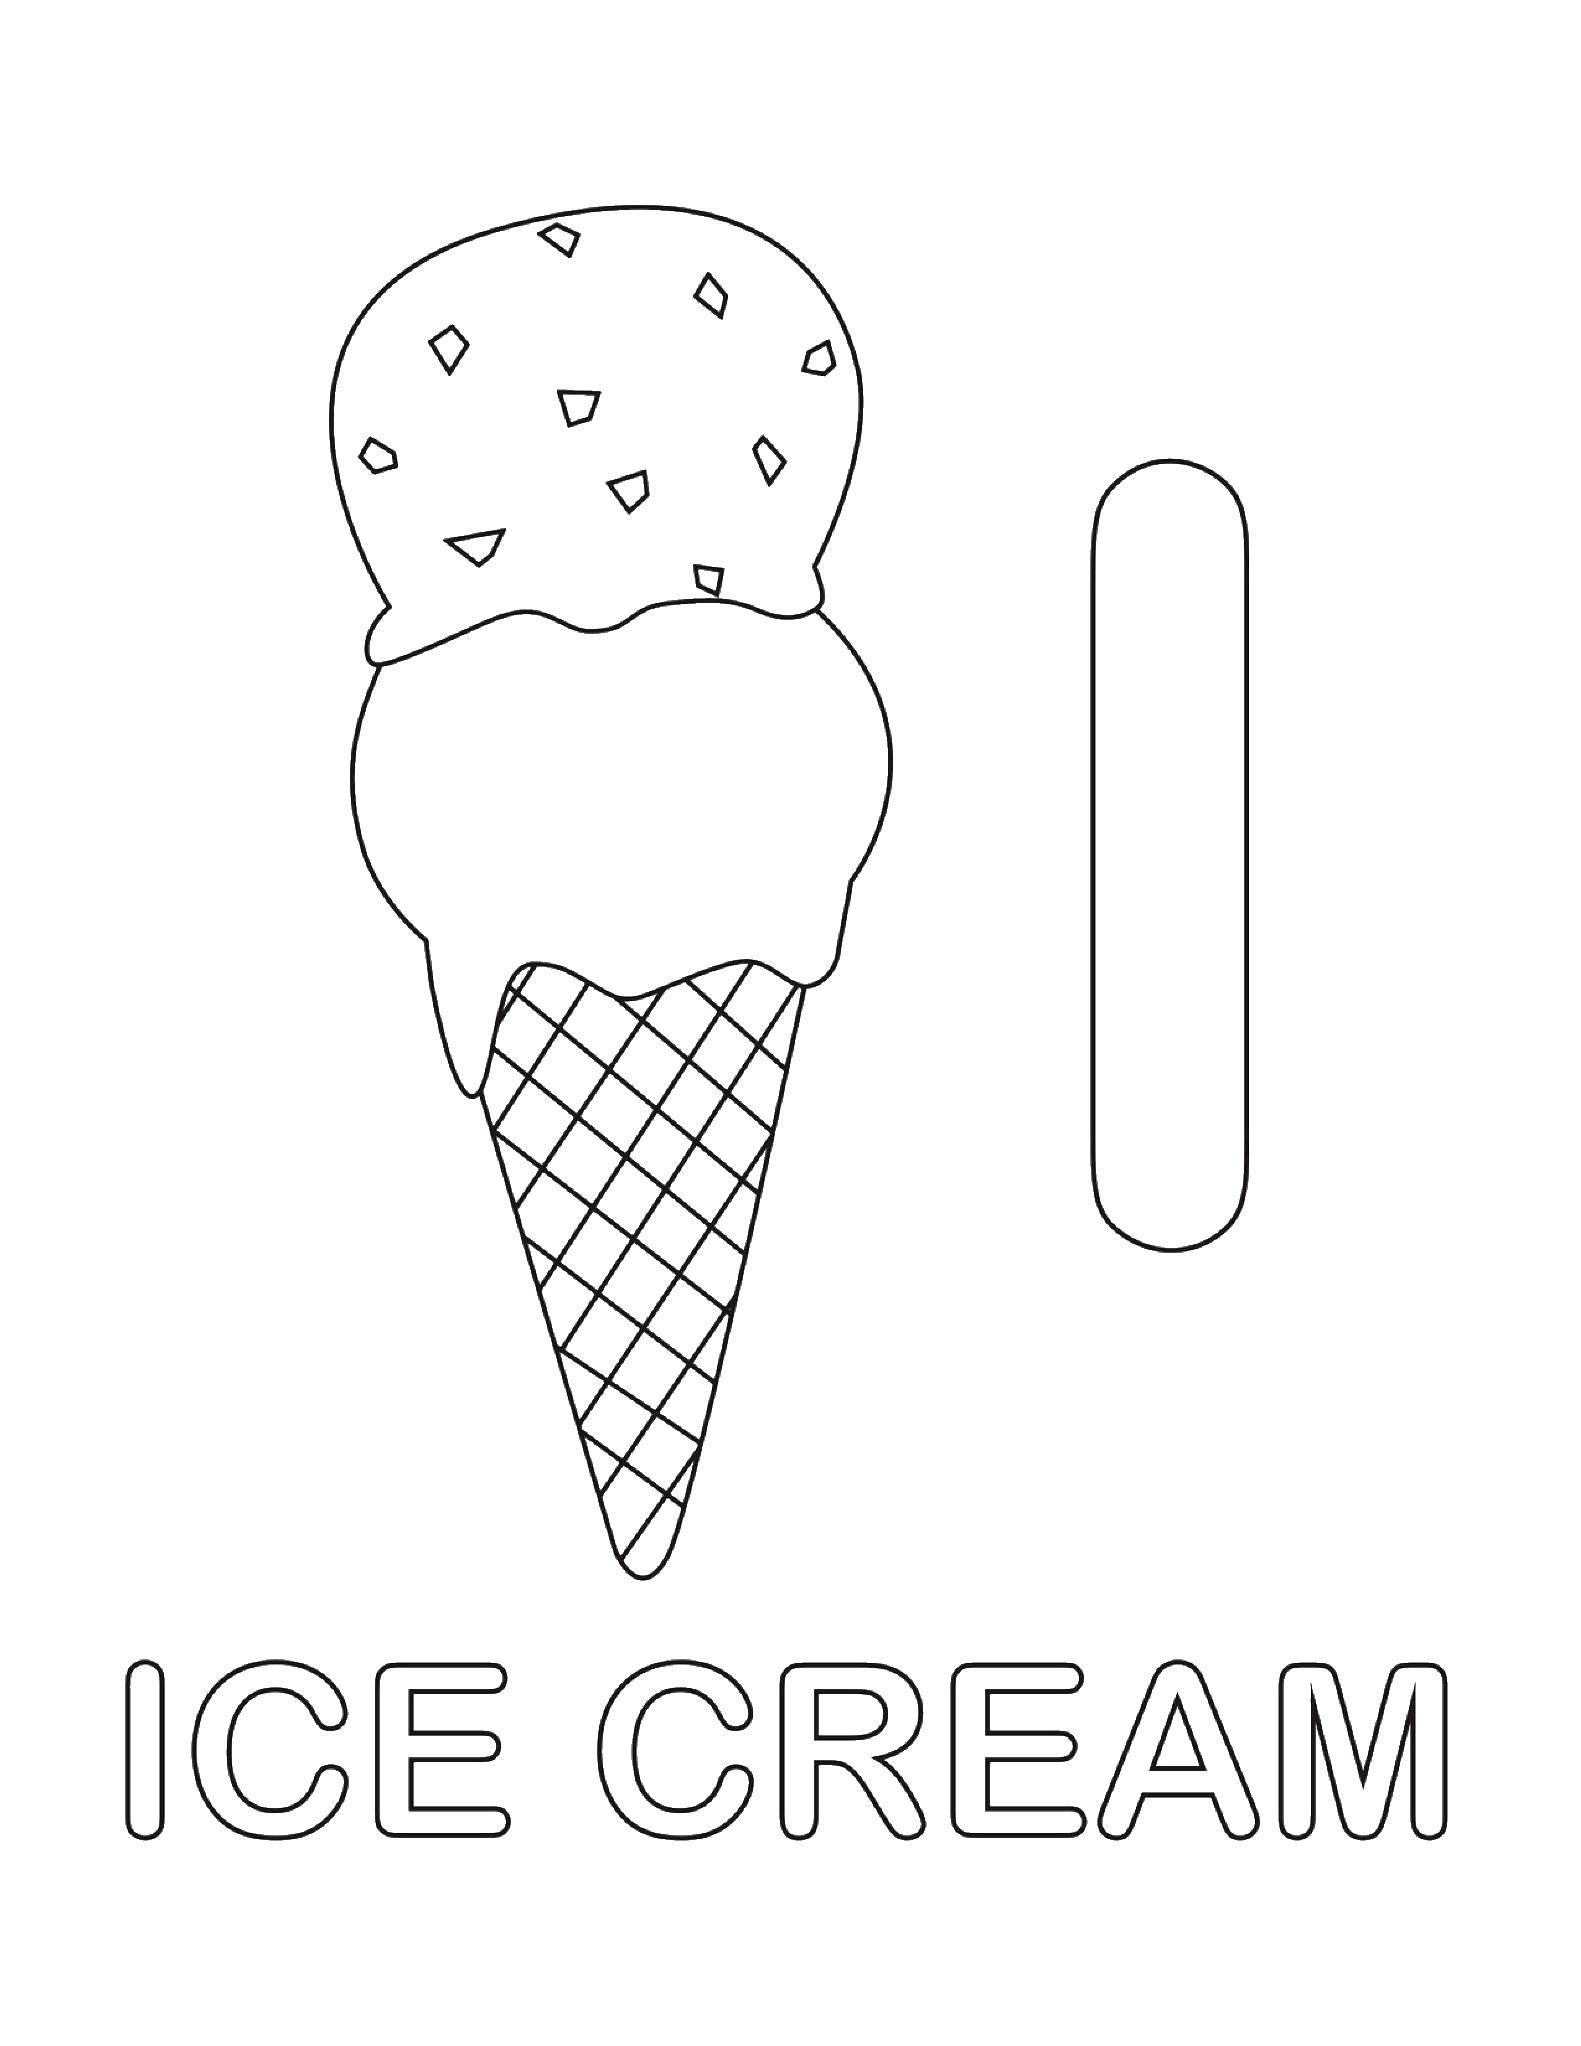 Coloring M ice cream. Category English words. Tags:  English.